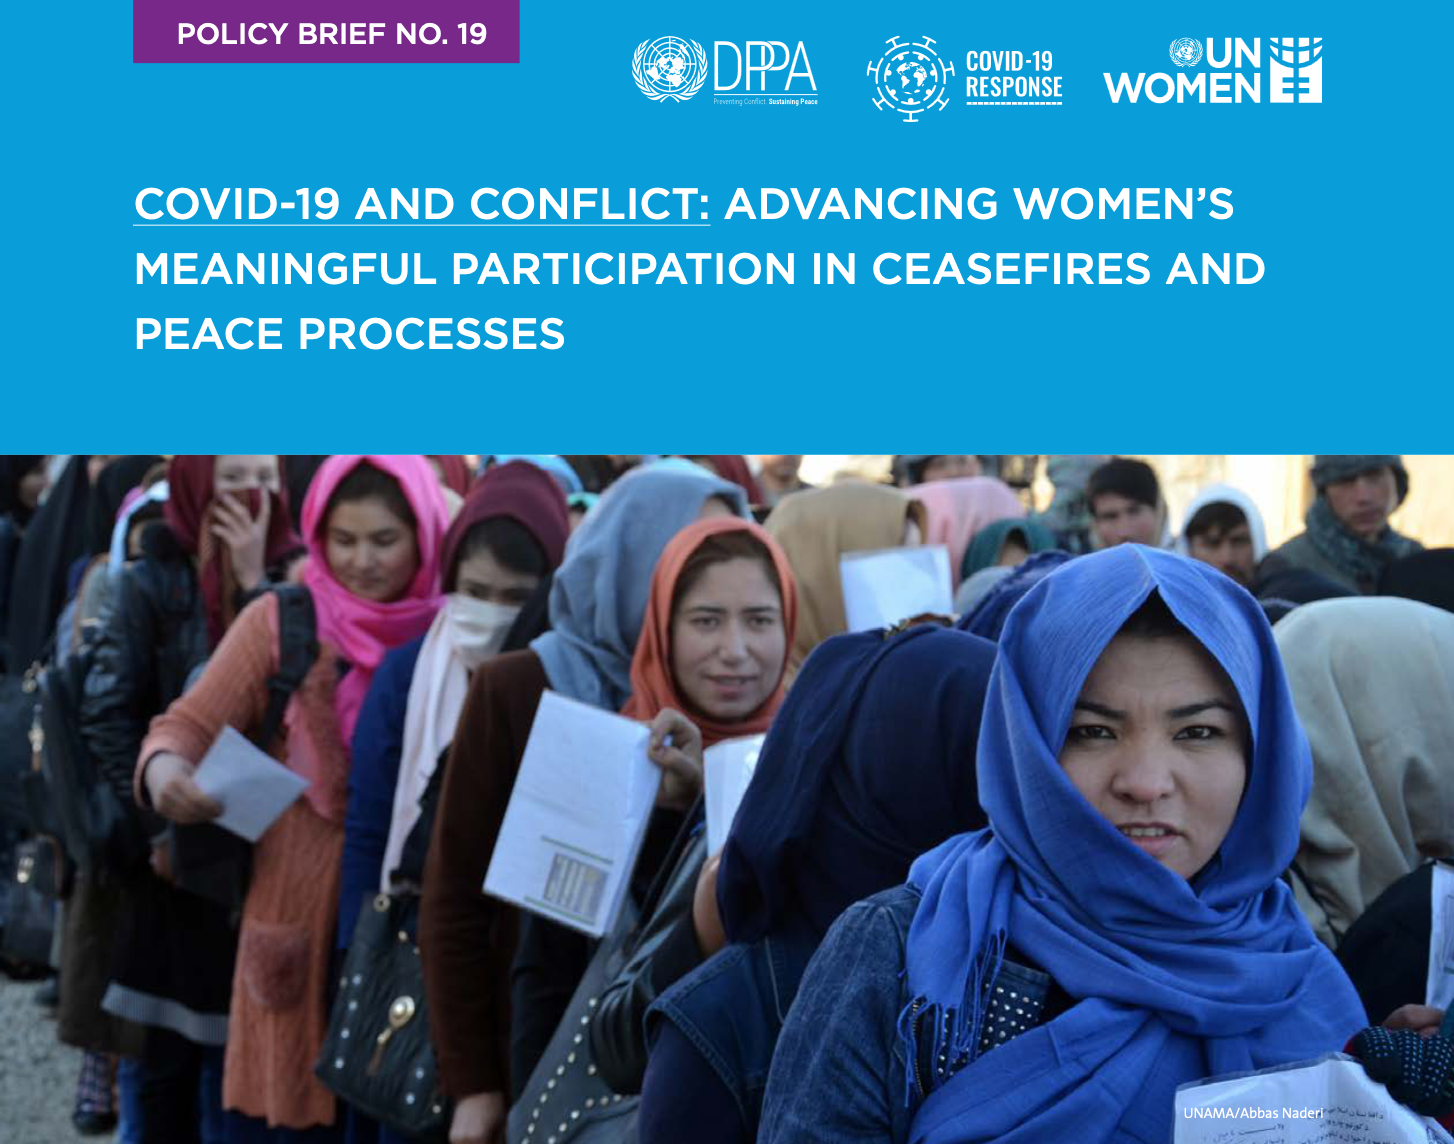 COVID-19 and conflict: Advancing women’s meaningful participation in ceasefires and peace processes